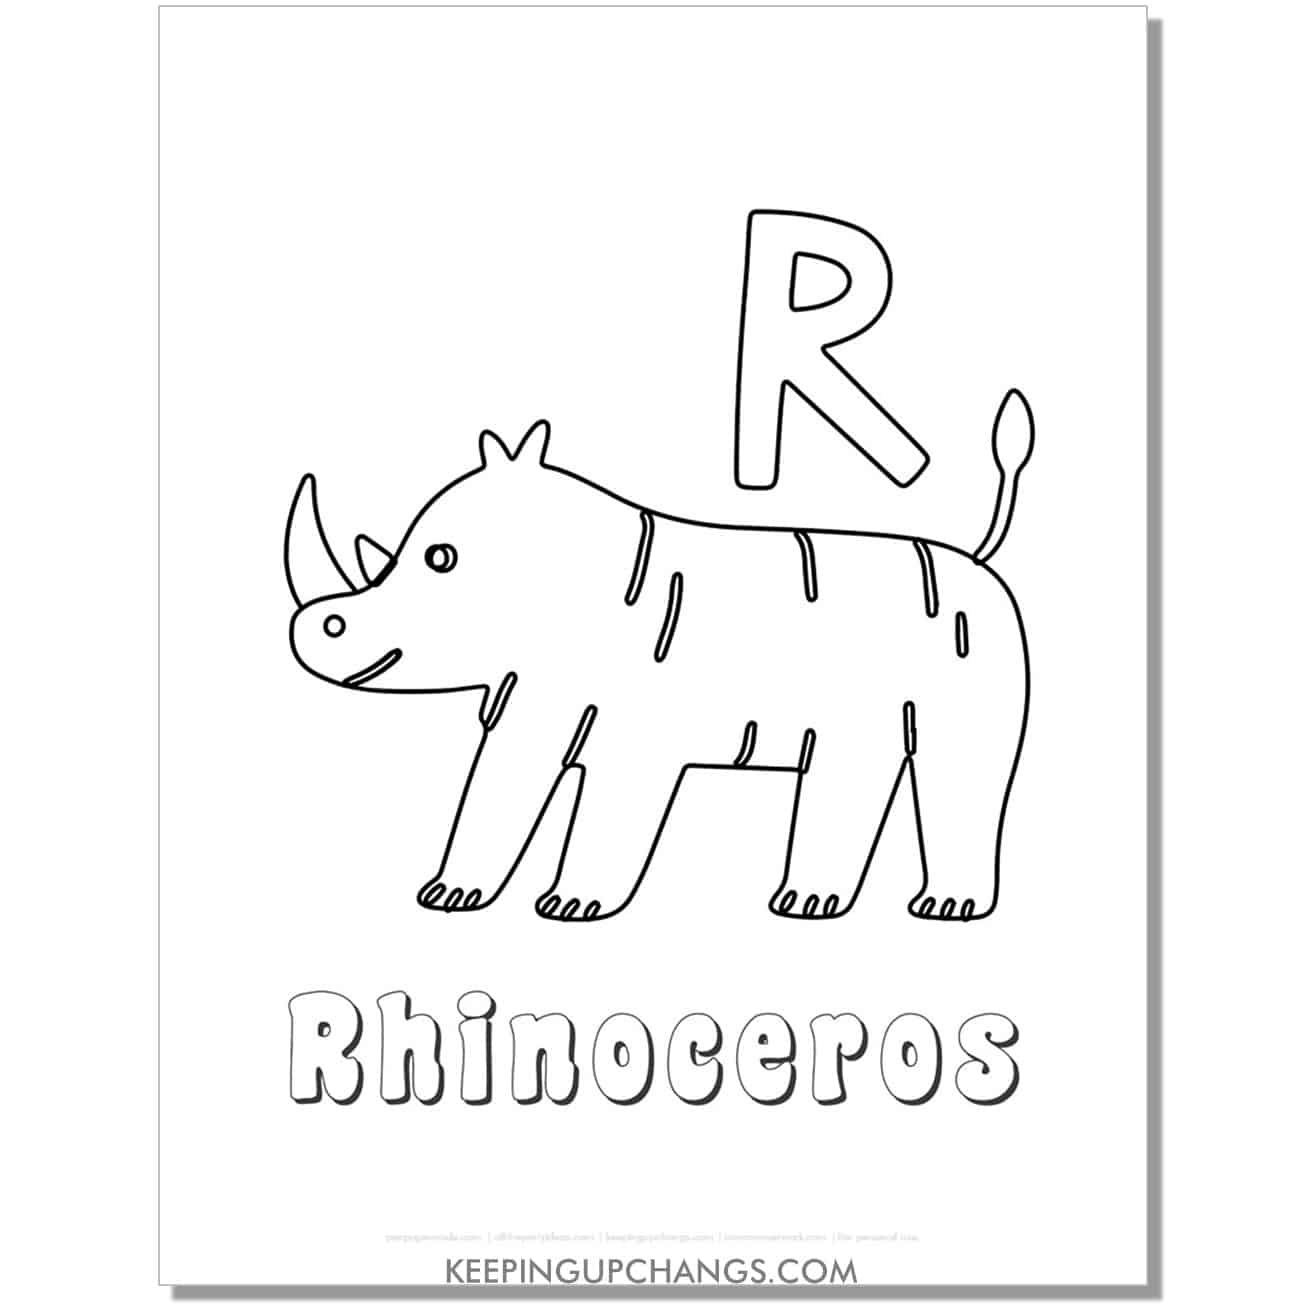 fun abc r coloring page with rhino hand drawing.